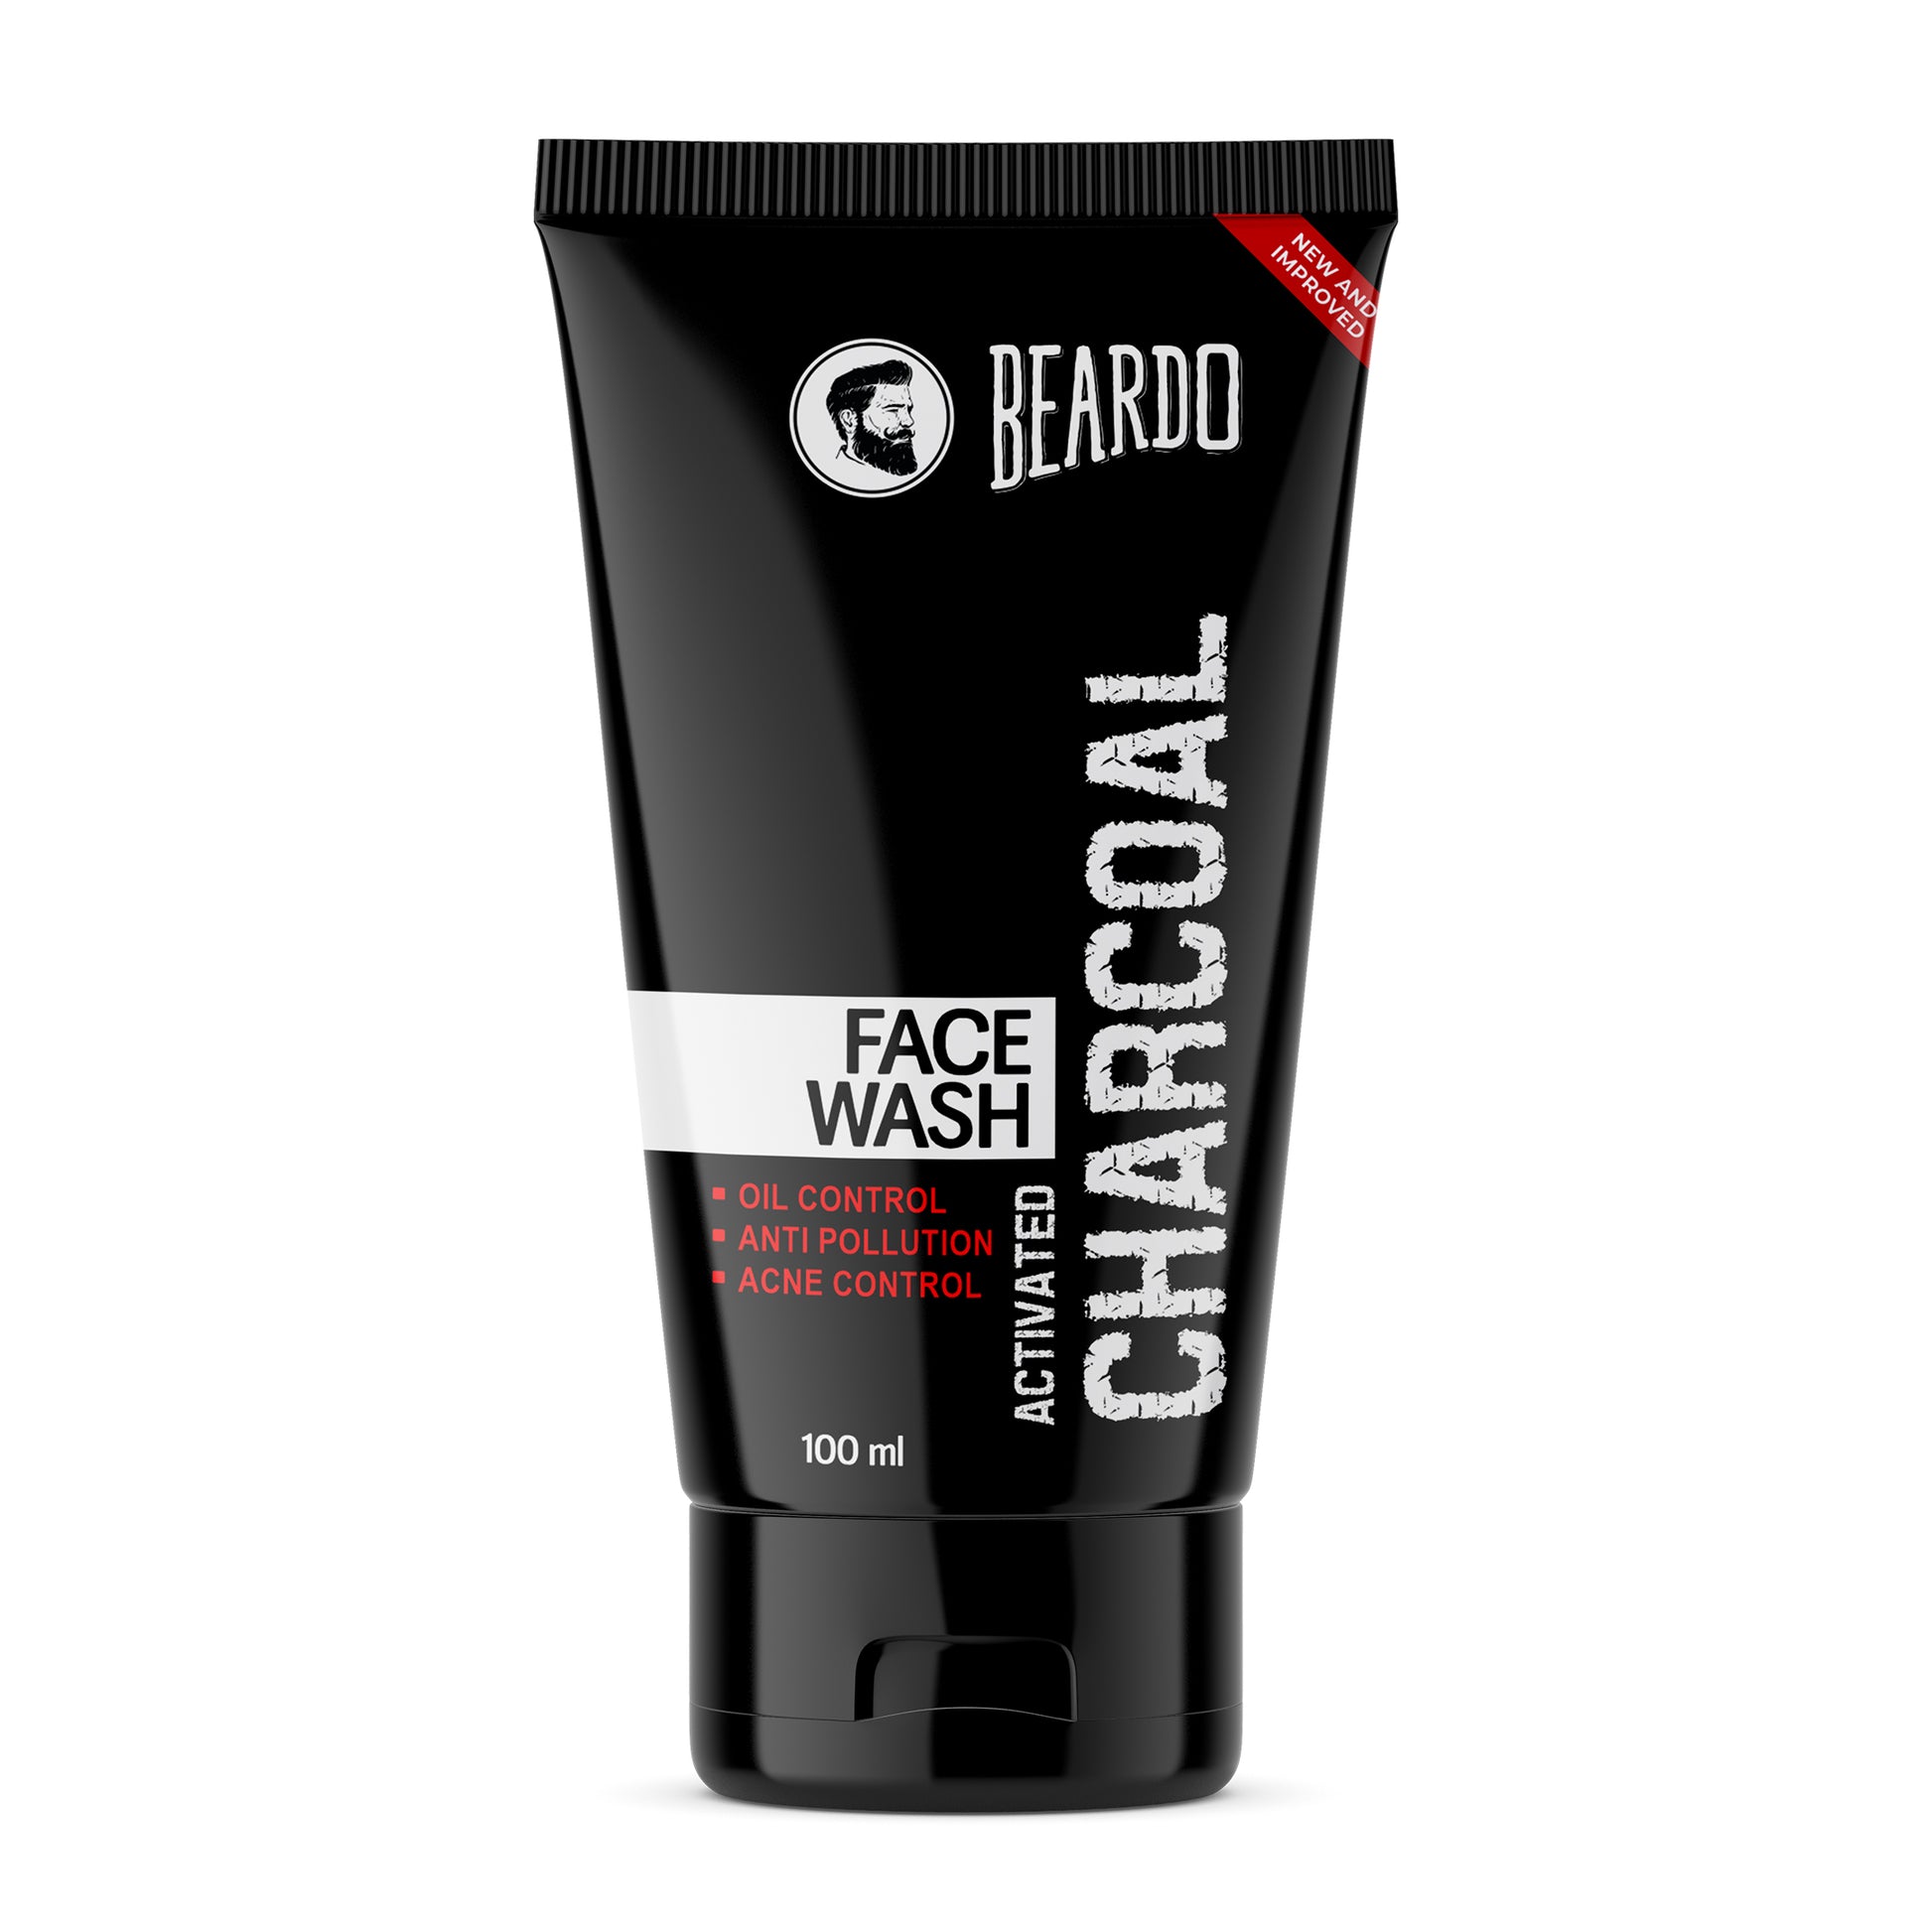 charcoal face wash, charcoal face wash for men, men charcoal, oil control face wash, acne control, beardo charcoal face wash, activated charcoal face wash, activated charcoal face wash, best charcoal face wash, charcoal face wash price